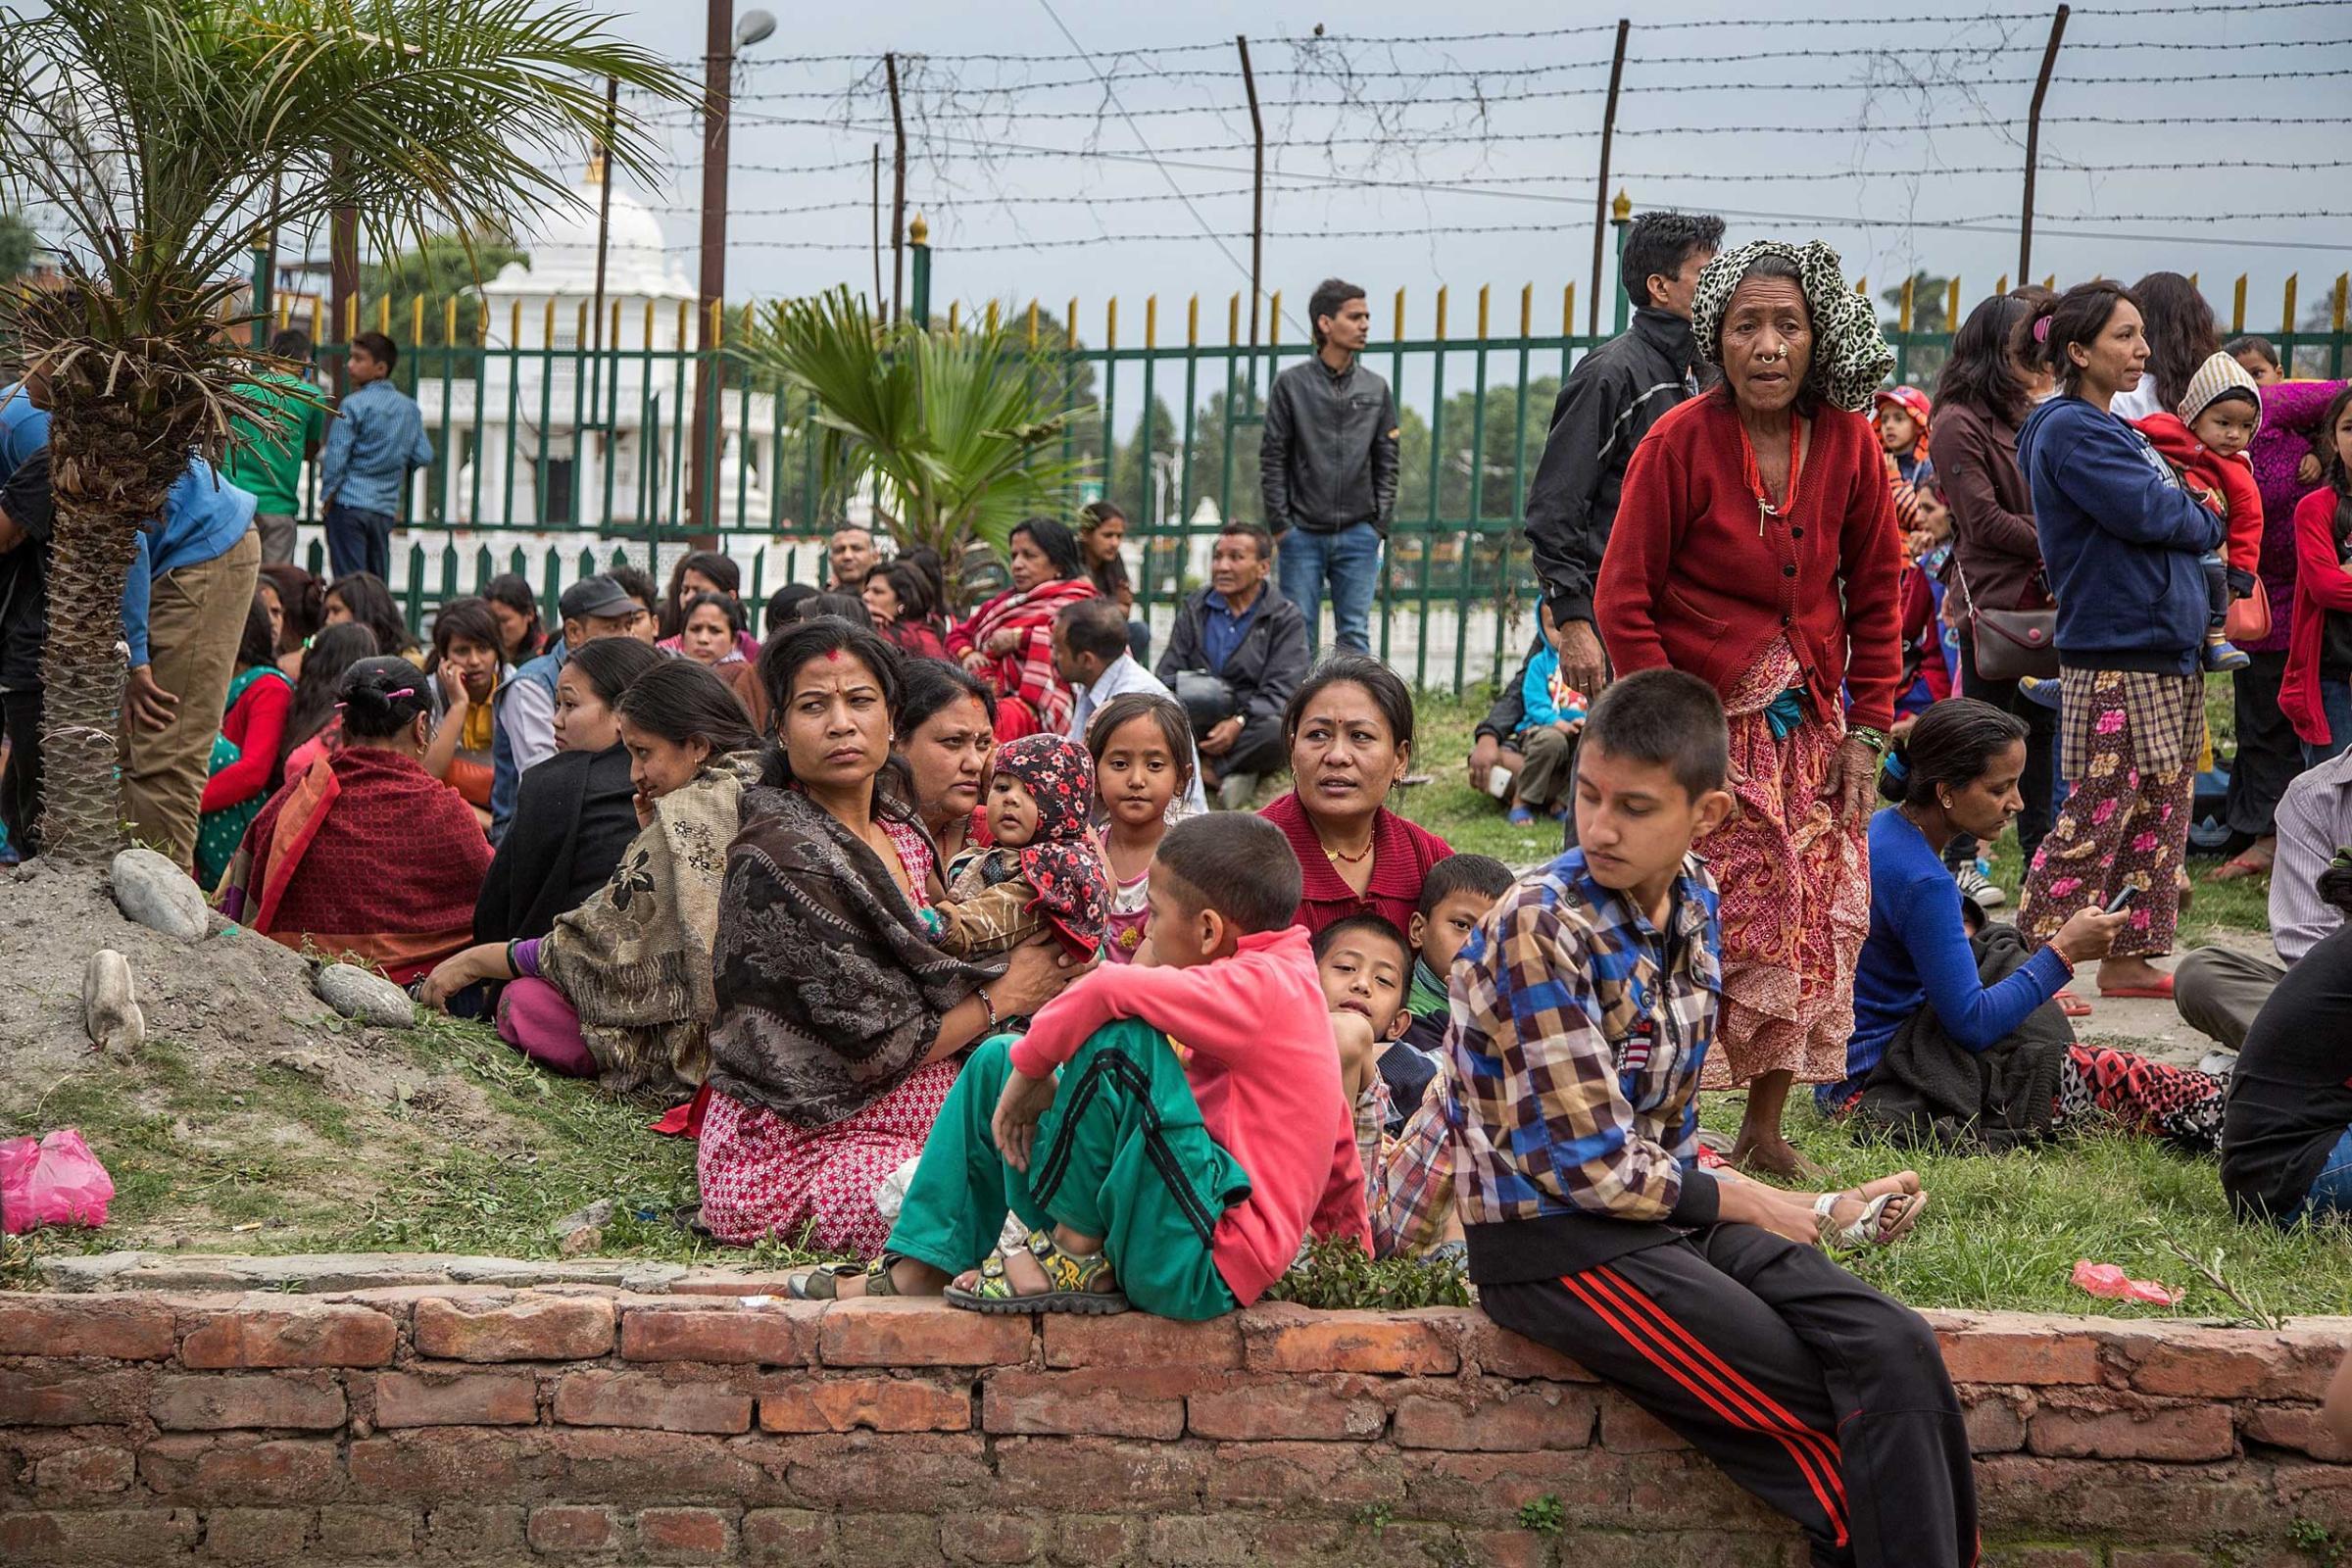 Residents sit in open spaces as aftershocks hit the city following an earthquake in Kathmandu on April 25, 2015.